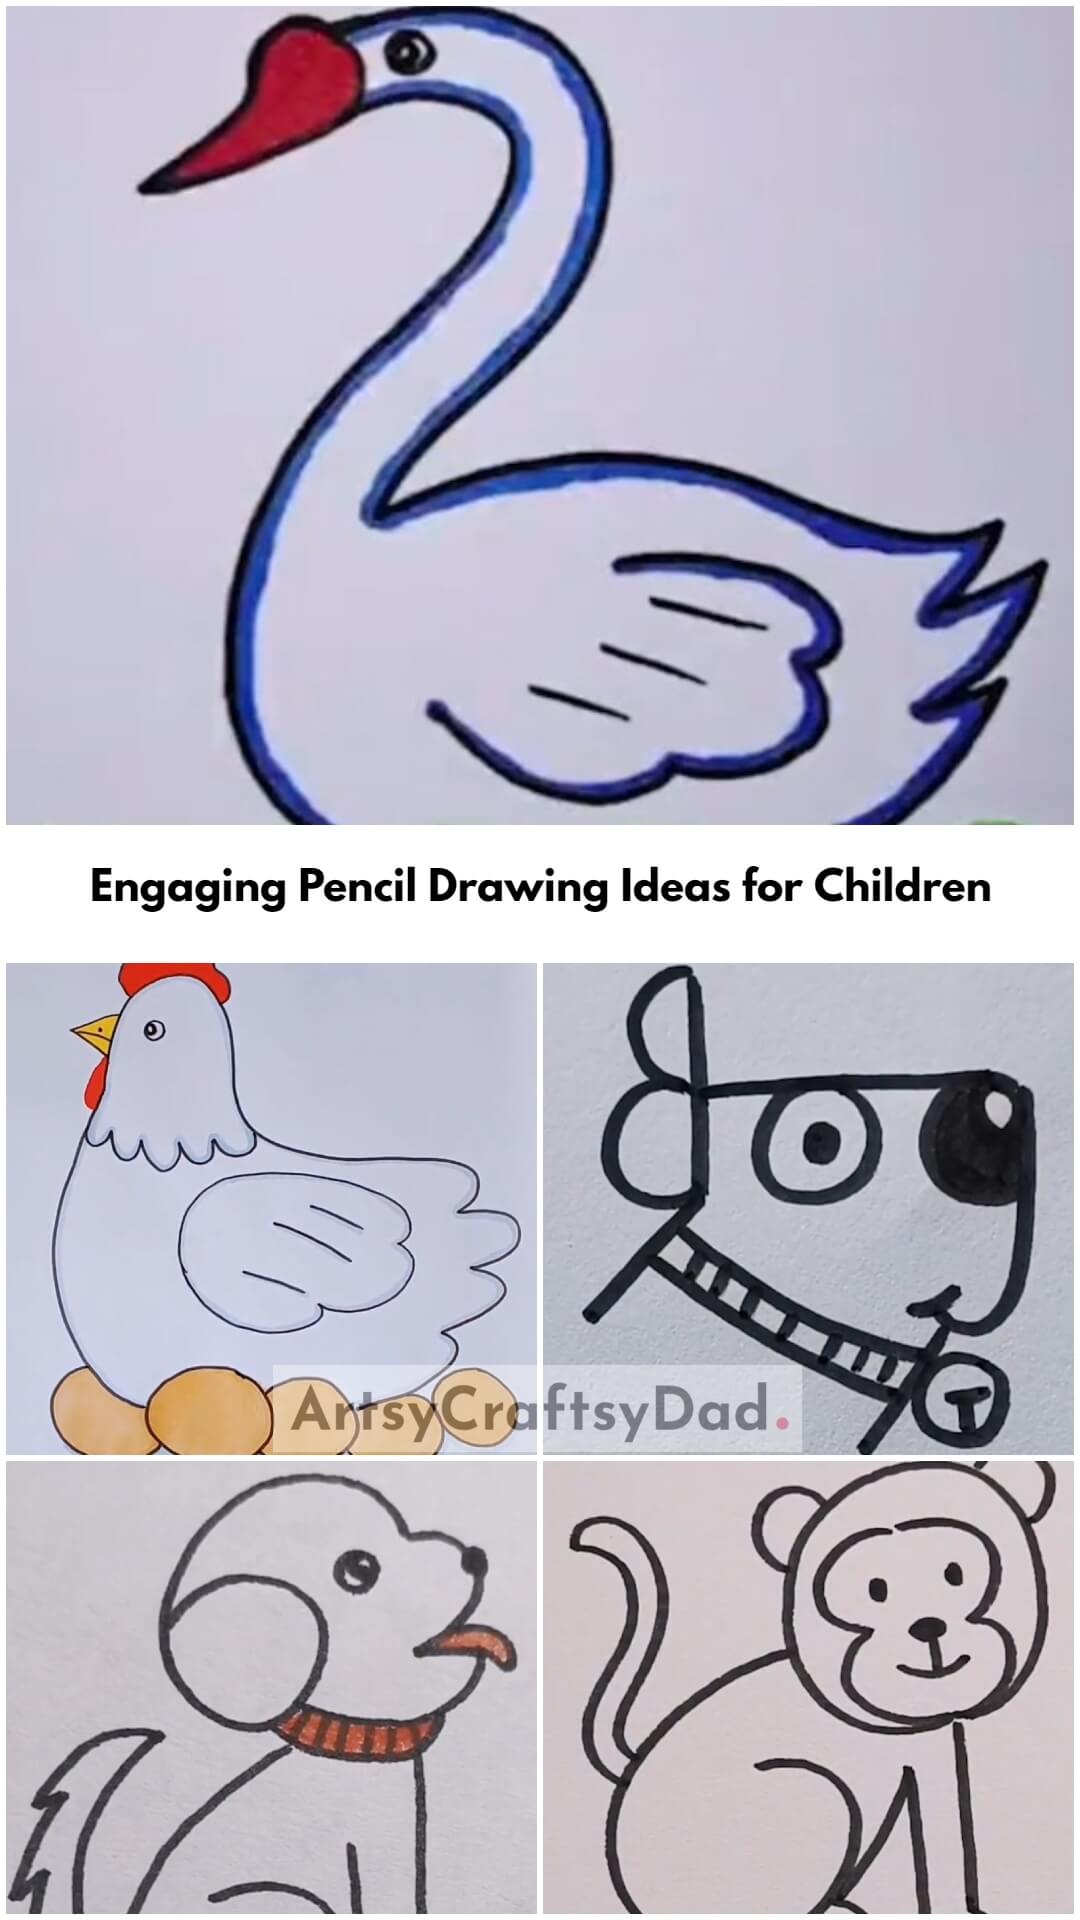 Fun and Engaging Pencil Drawing Ideas for Children